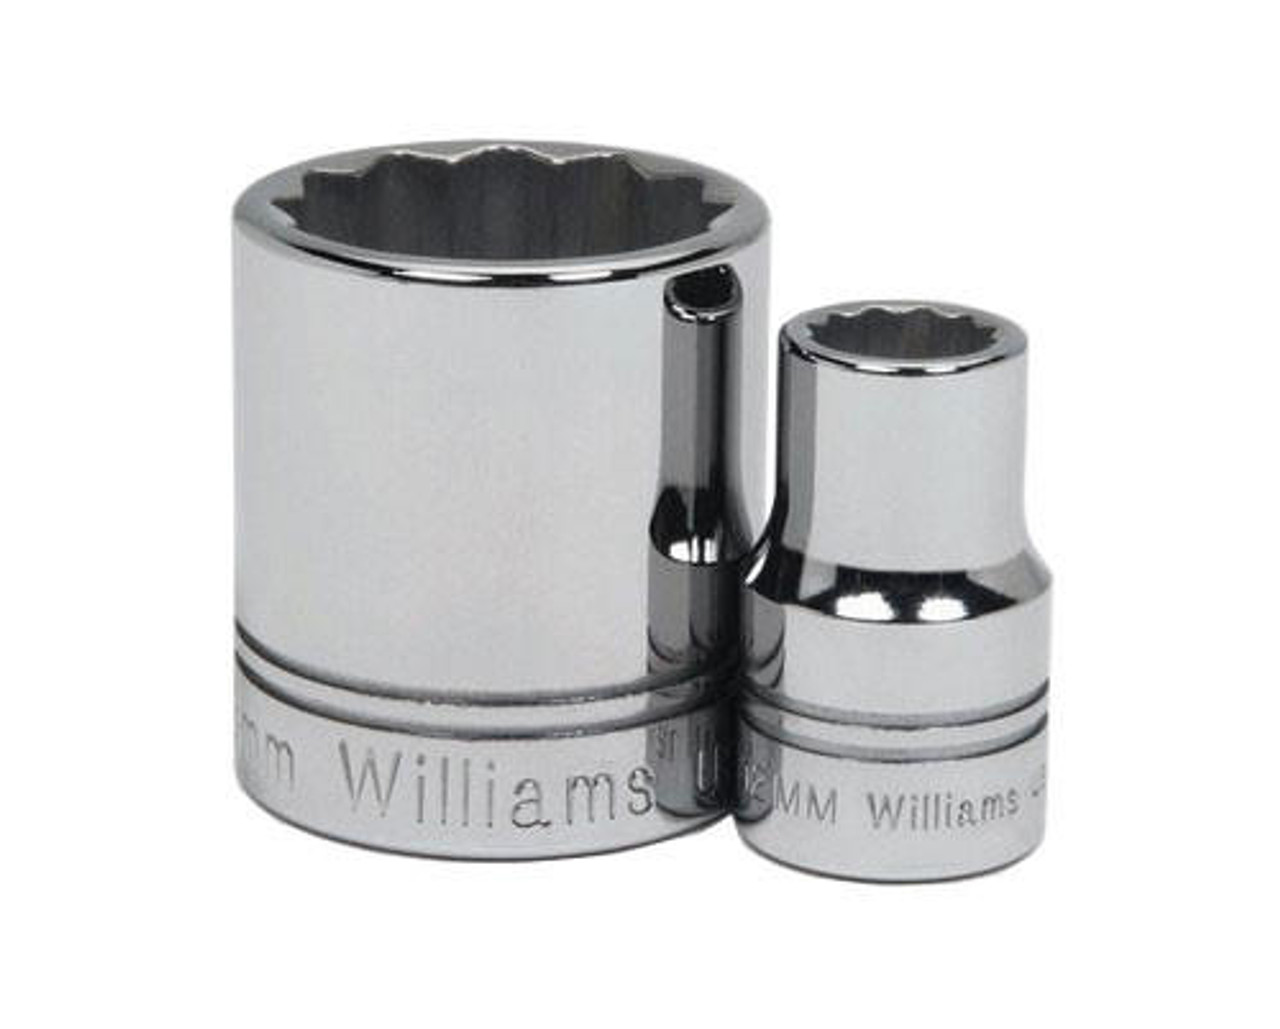 Williams Made In USA 10MM Williams 1/2" Dr Shallow Socket 12 Pt - STM-1210 